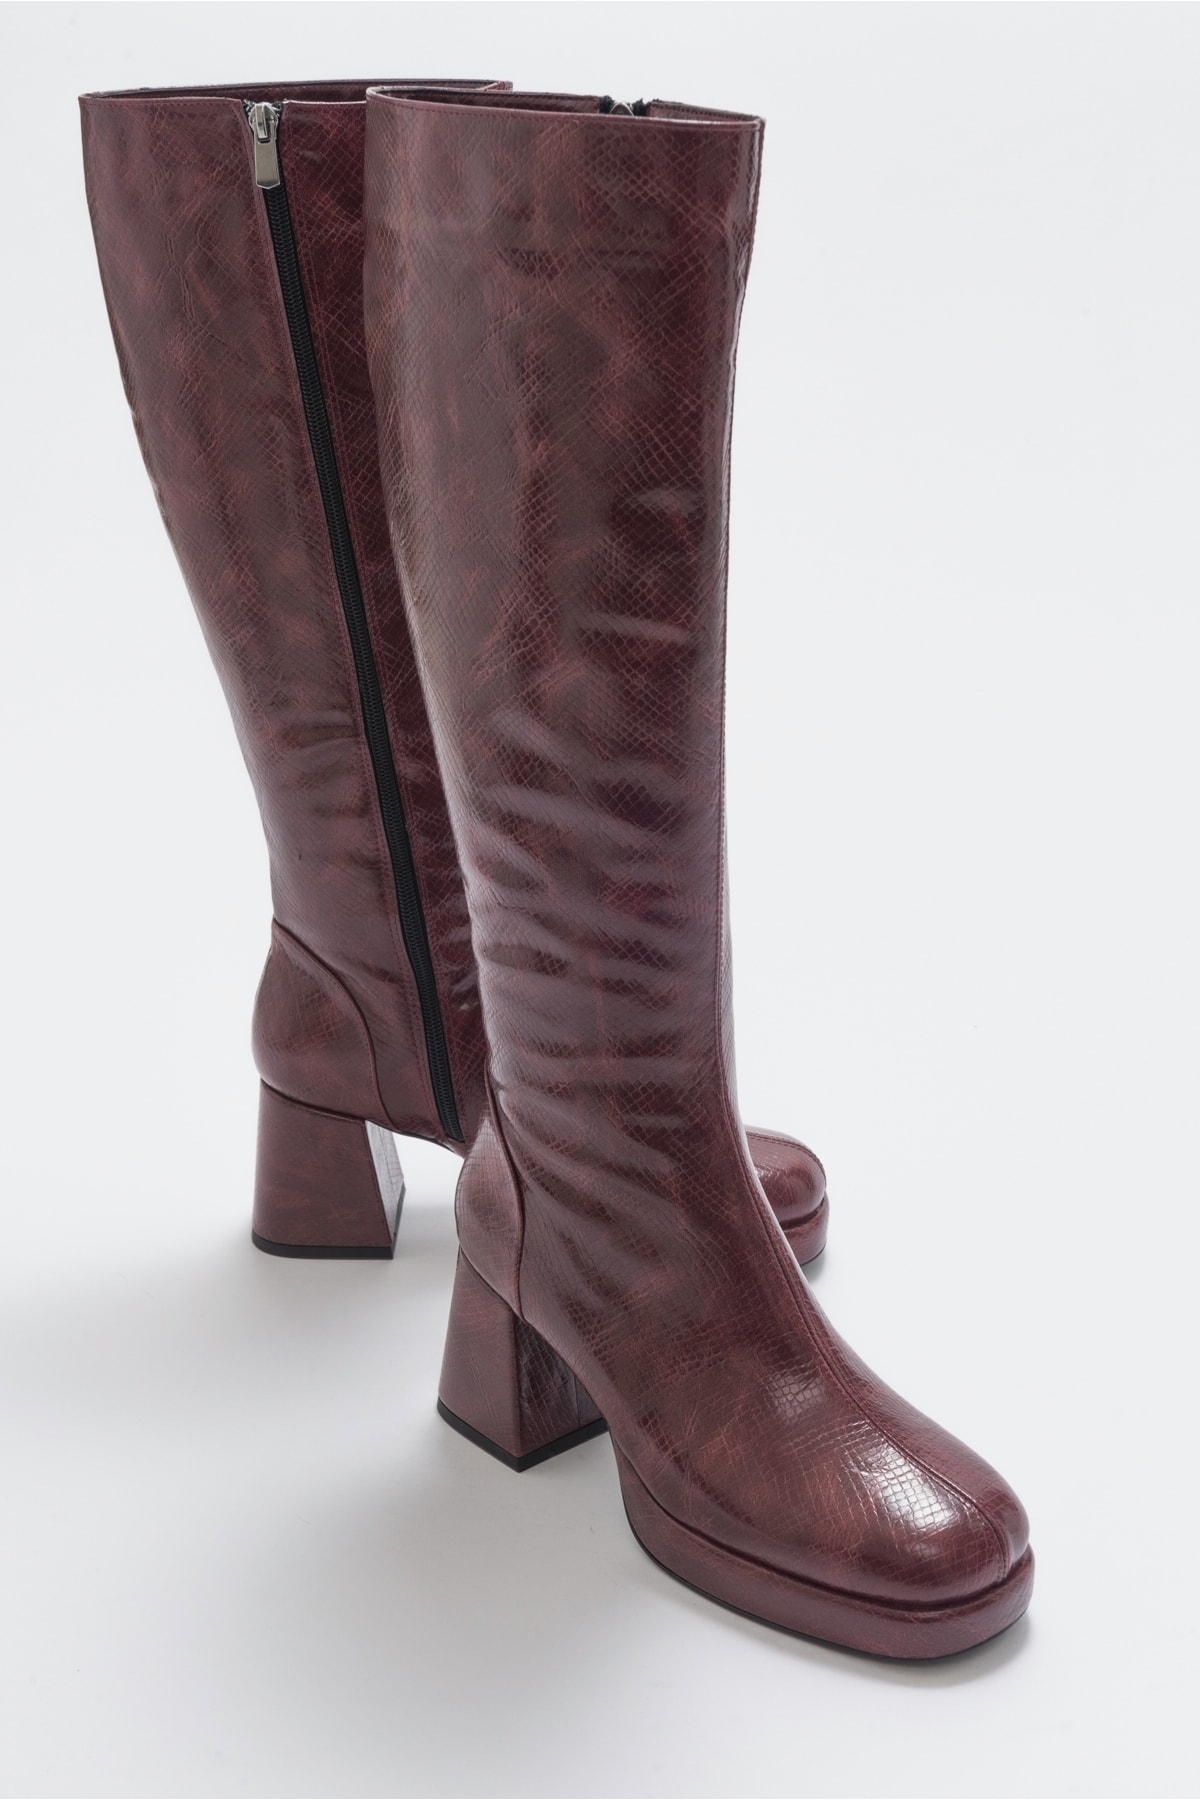 LuviShoes Noote Burgundy Print Women's Boots